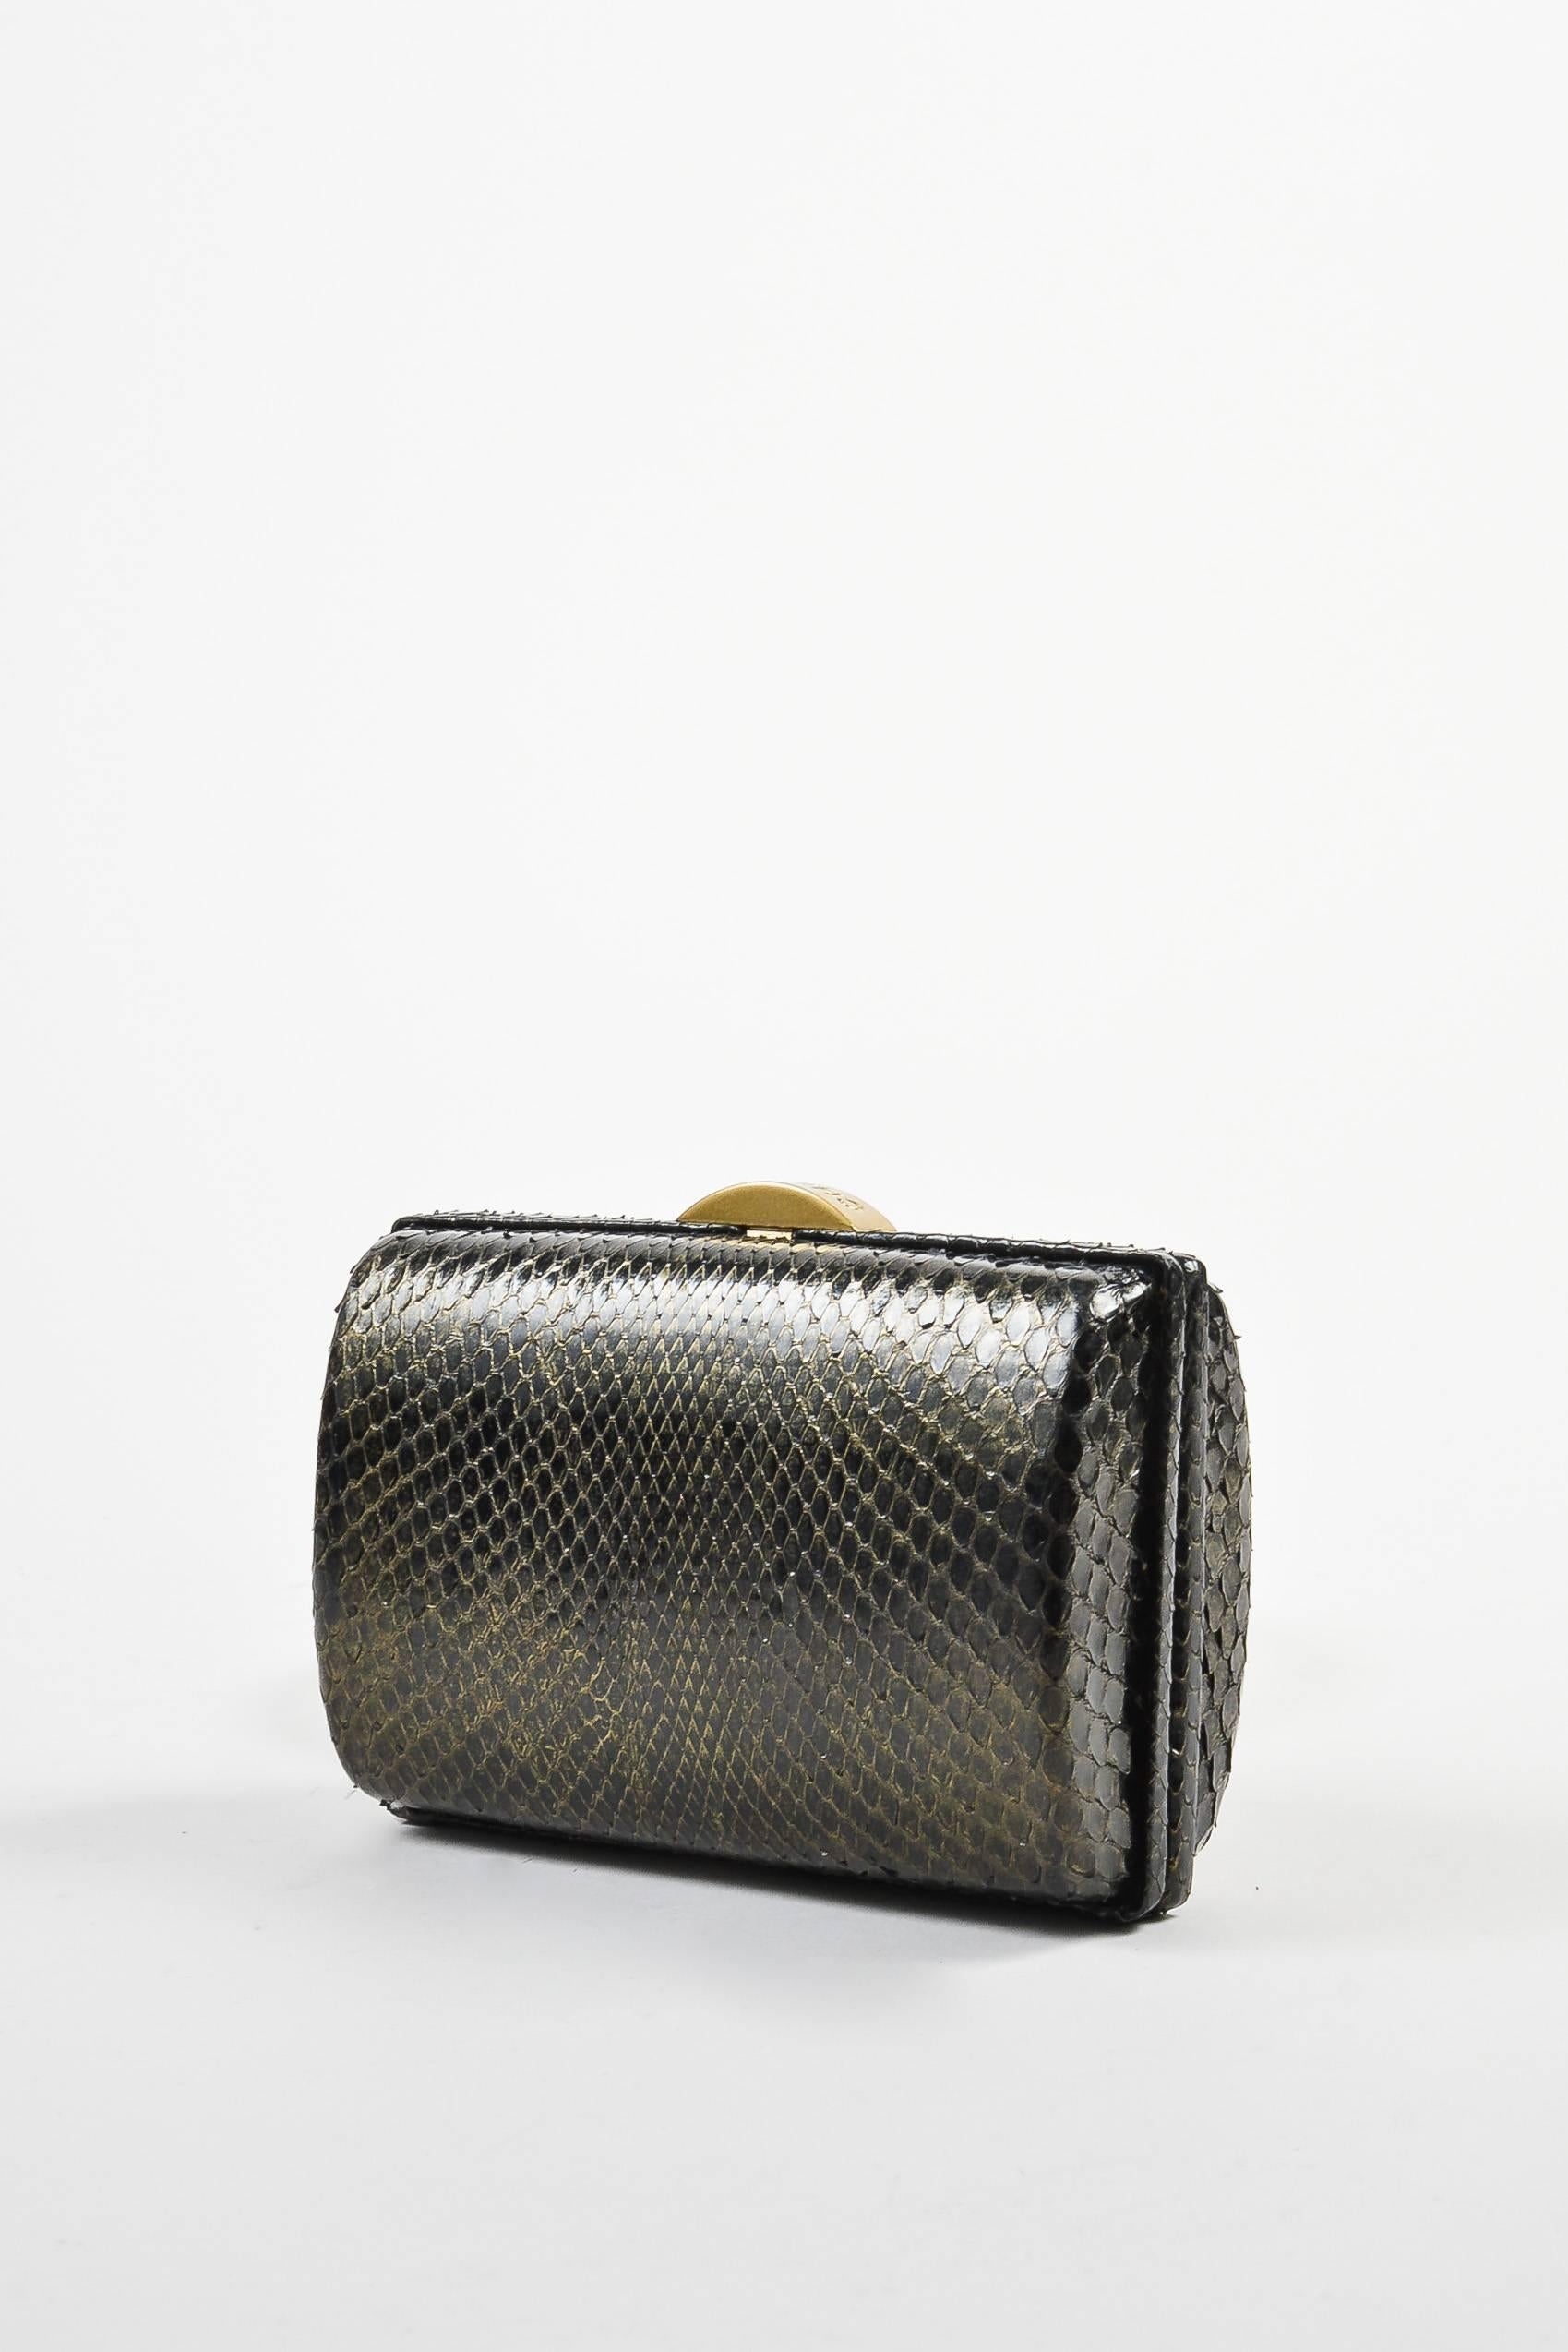 Dainty and luxurious box clutch by Chanel. Black python exterior with a gold-tone closure. The perfect choice for a cocktail hour or a night on the town. Small size will hold only the essentials. Frame design hinges open. Lined in metallic gold-tone